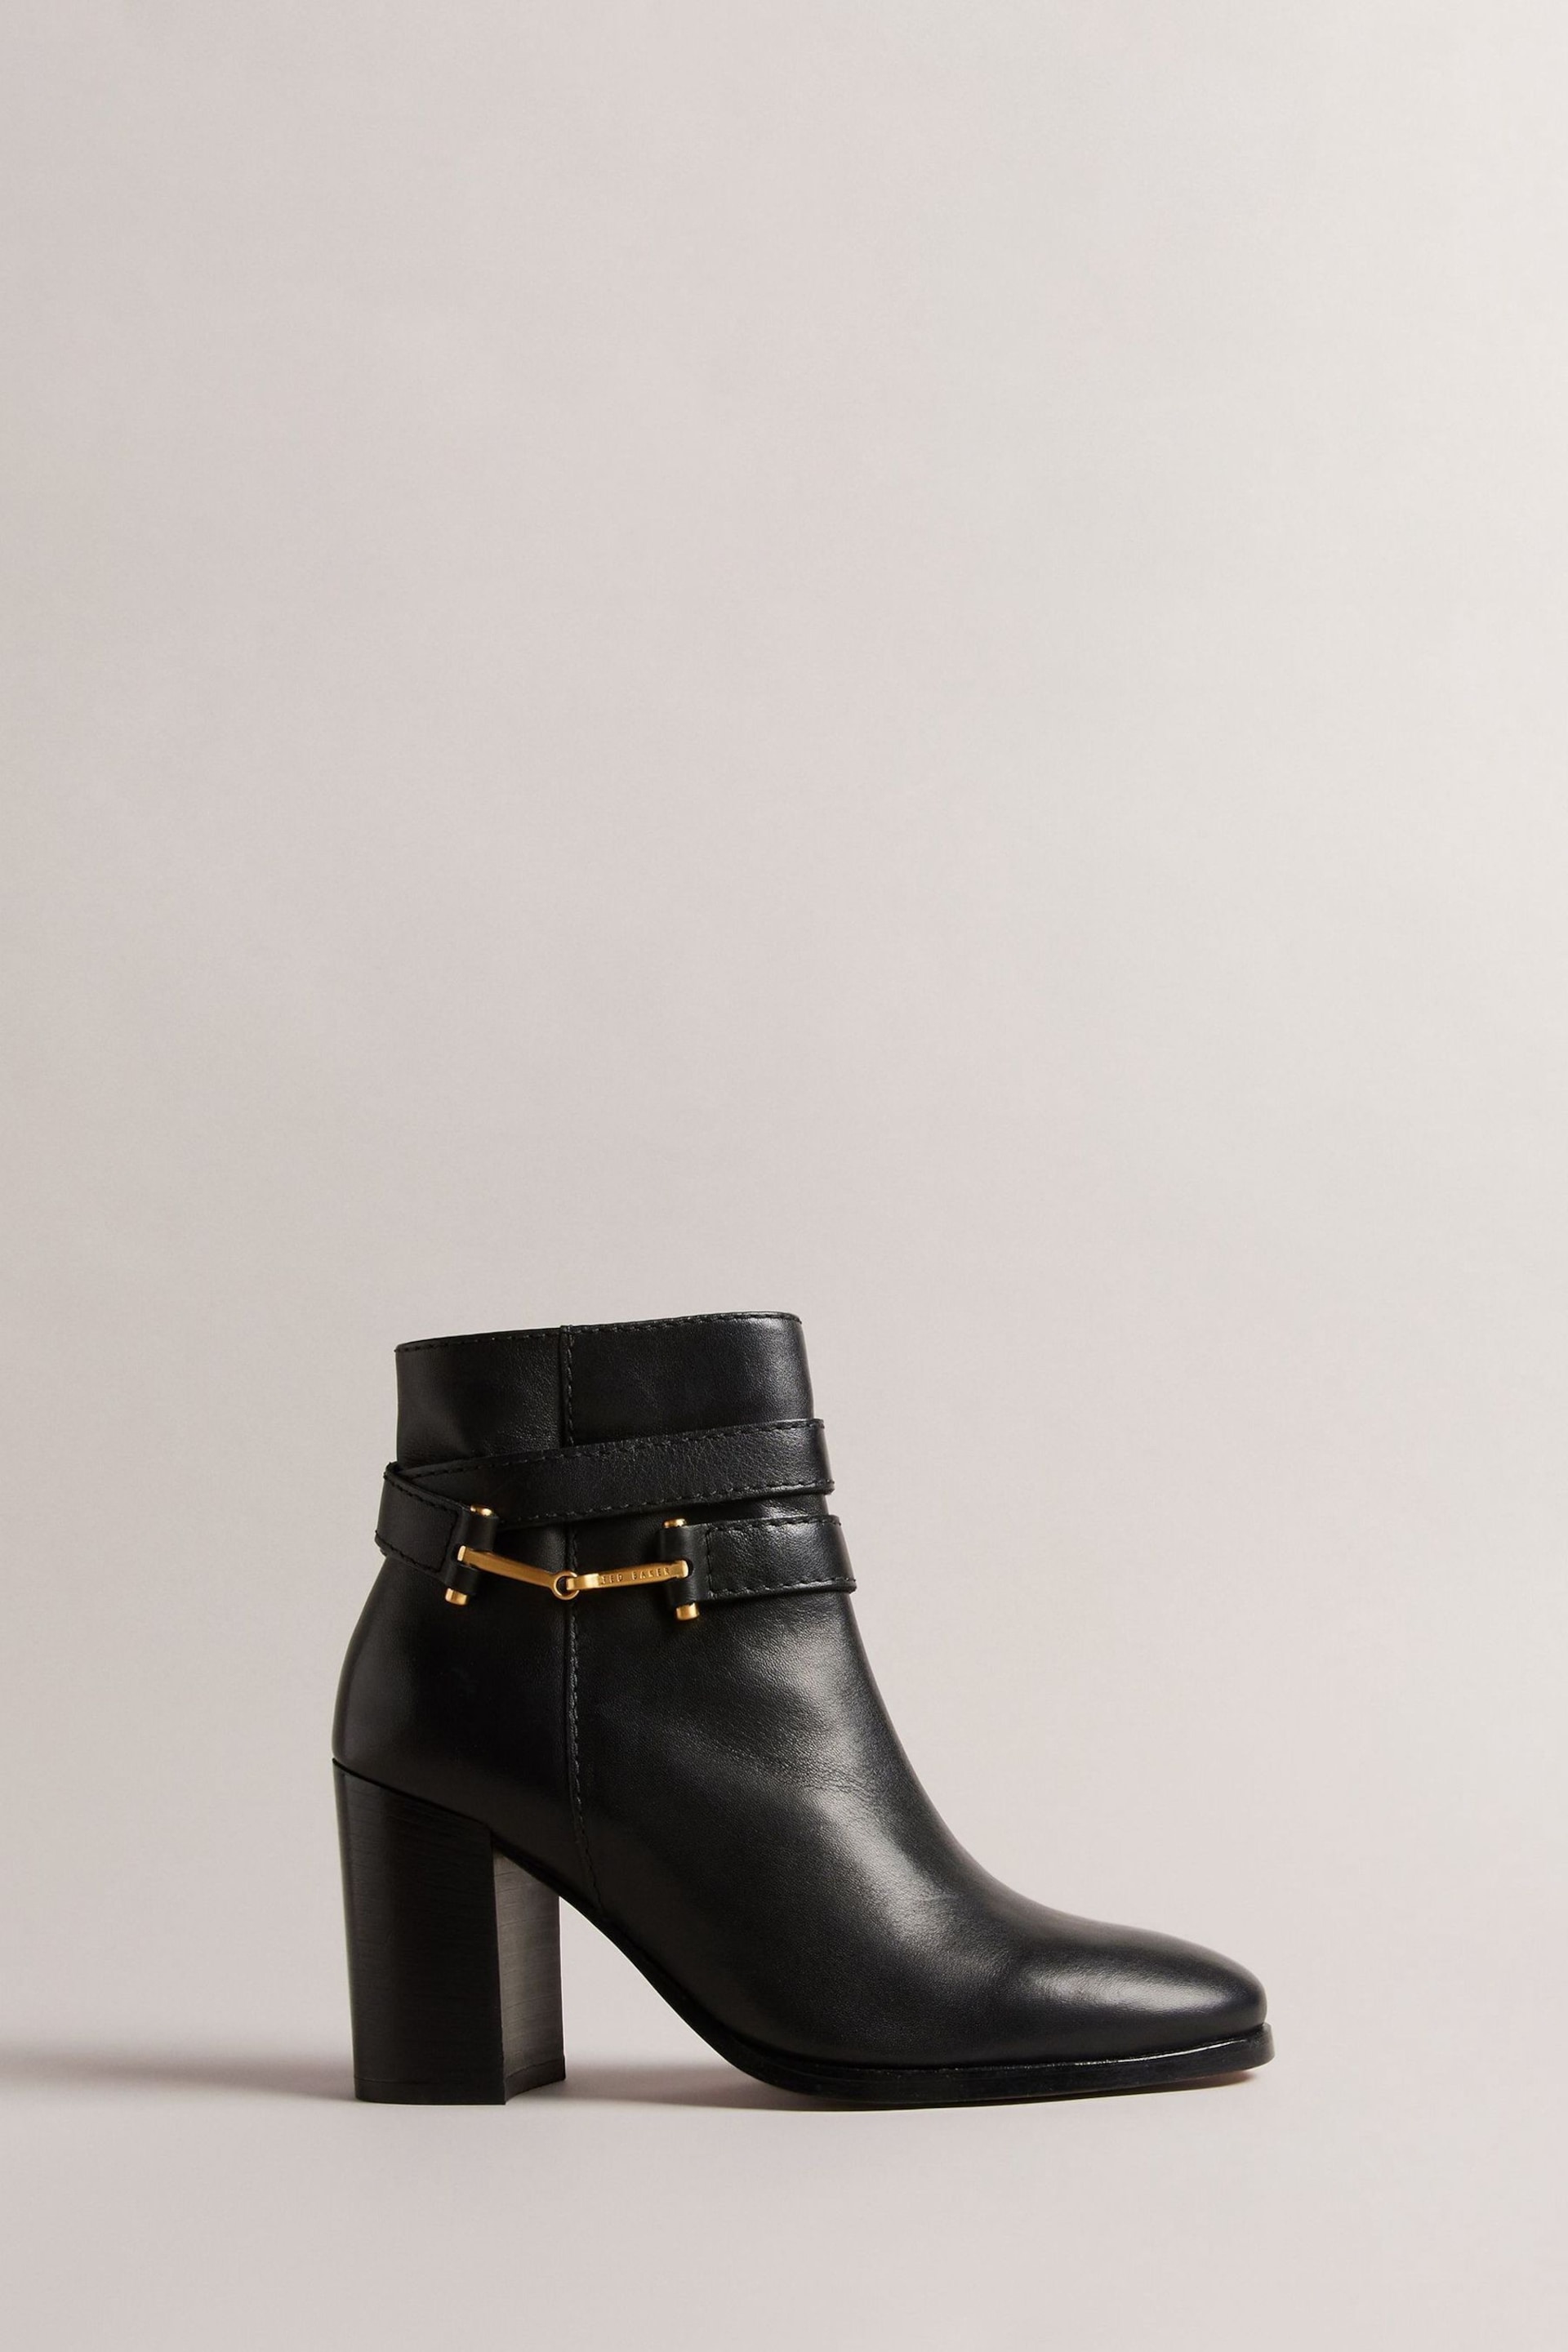 Ted Baker Black T Hinge Anisea Leather 85mm Ankle Boots - Image 1 of 4